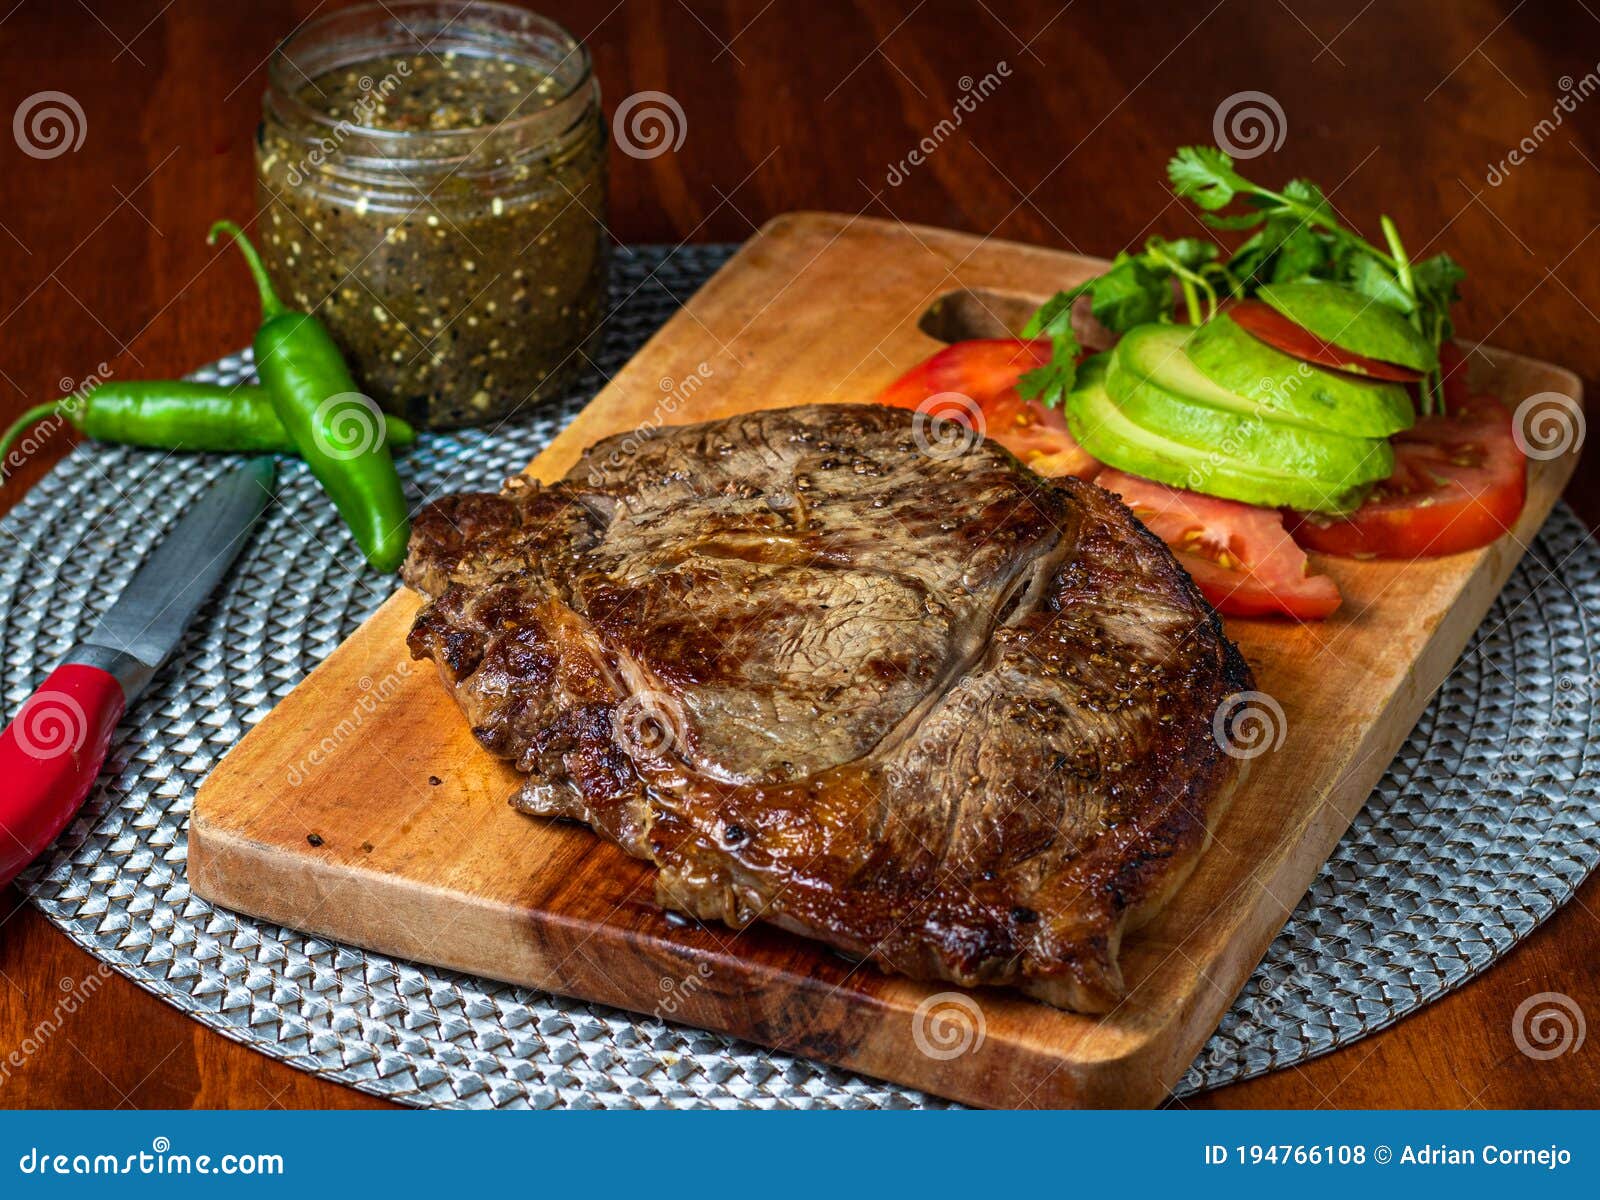 delicious steak with green sauce and avocado